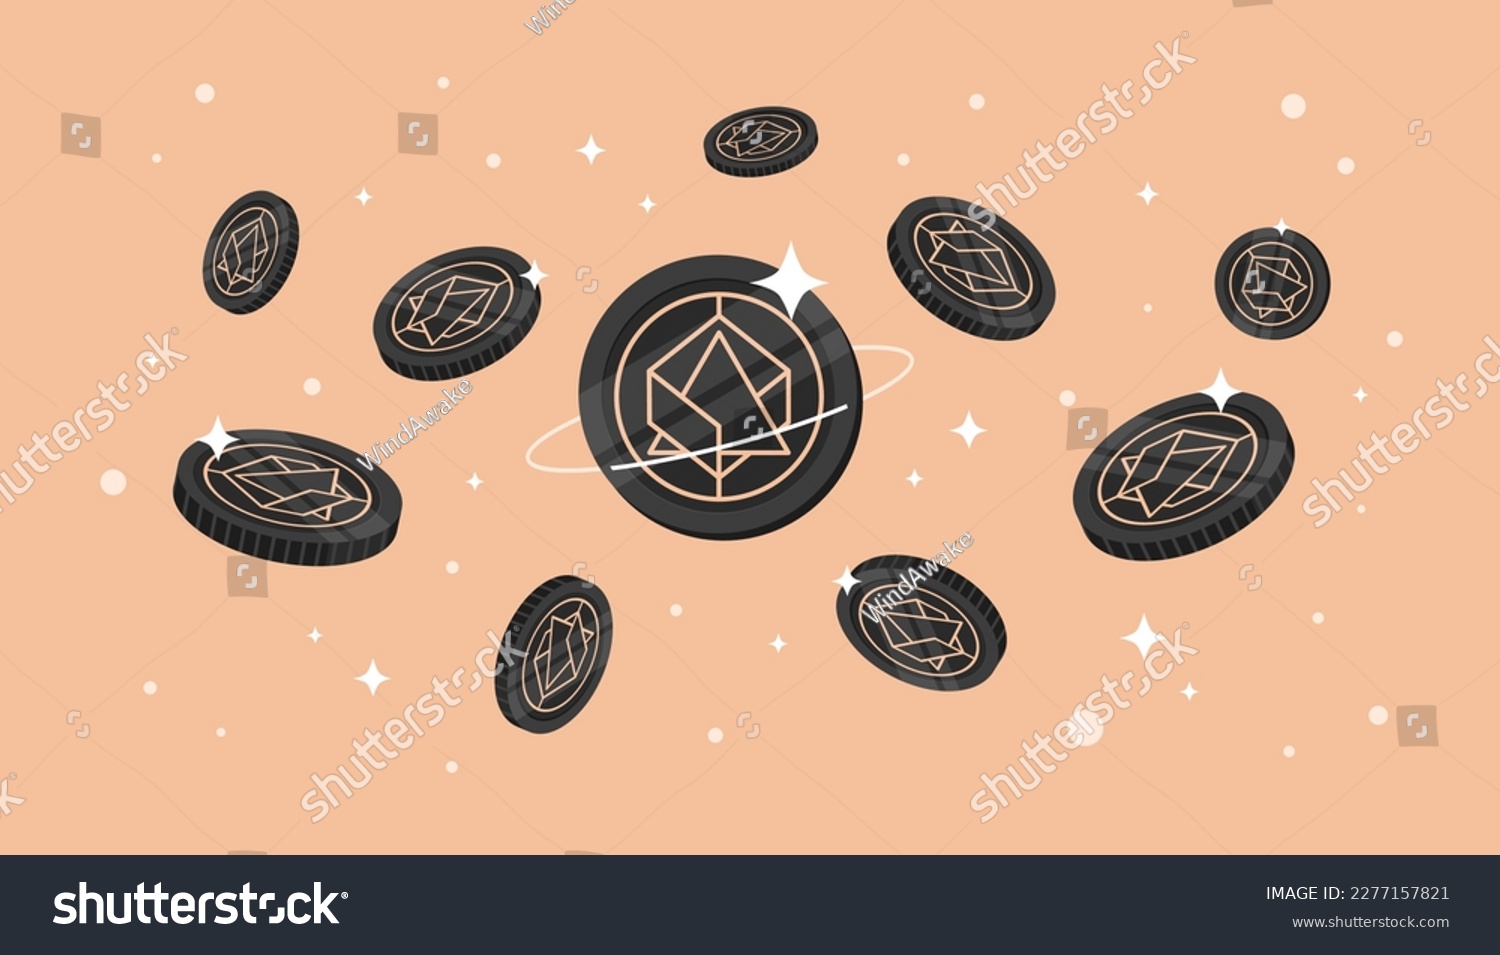 SVG of Alchemix coins falling from the sky. ALCX cryptocurrency concept banner background. svg